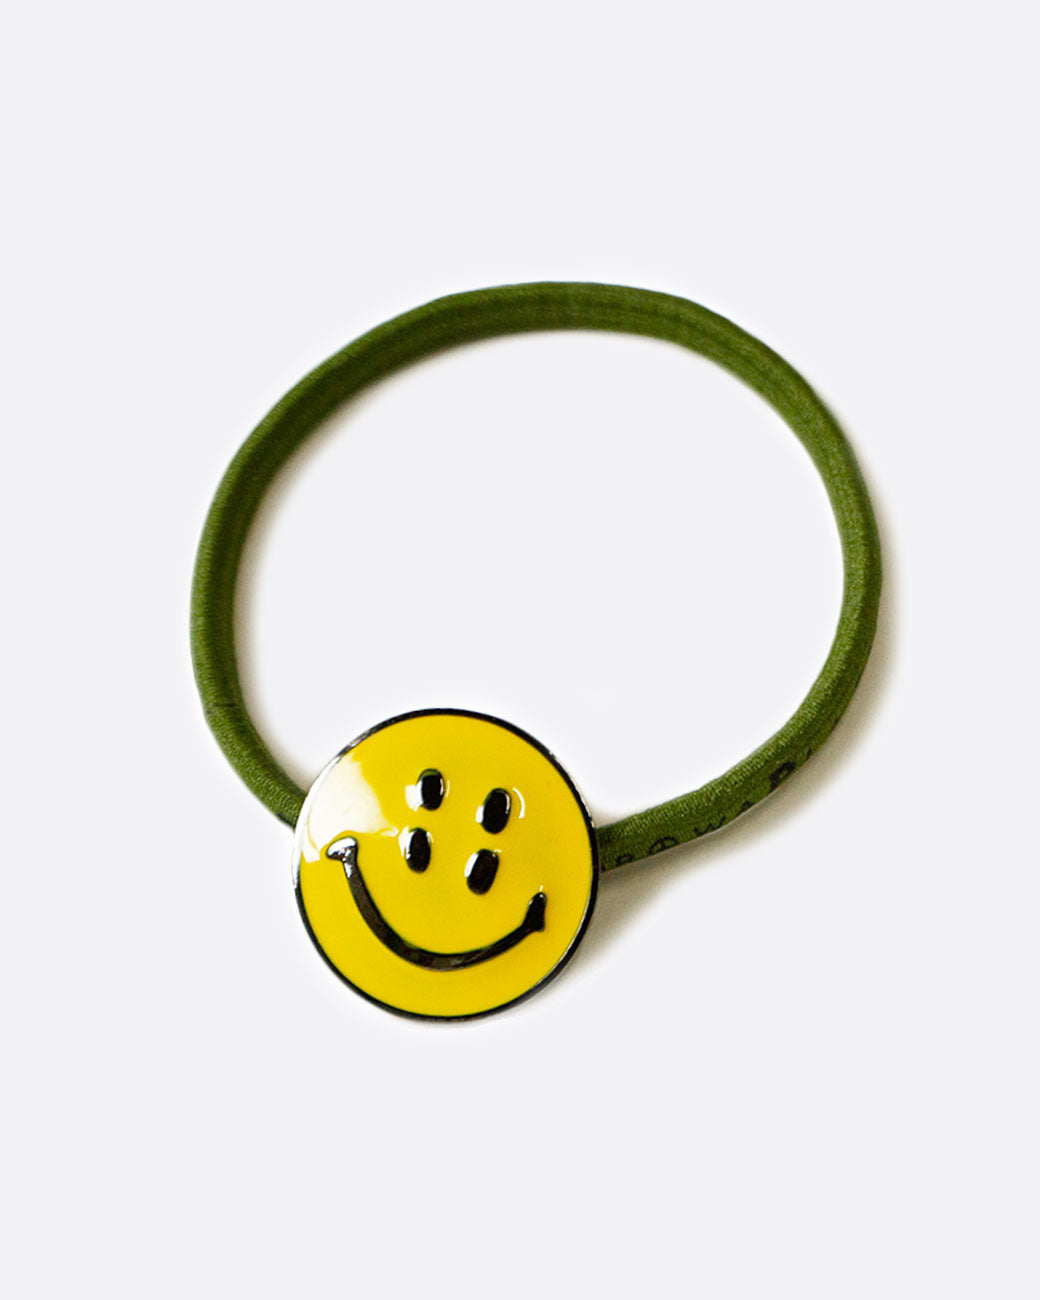 Kapital smiley hair tie in khaki green, shown from above.